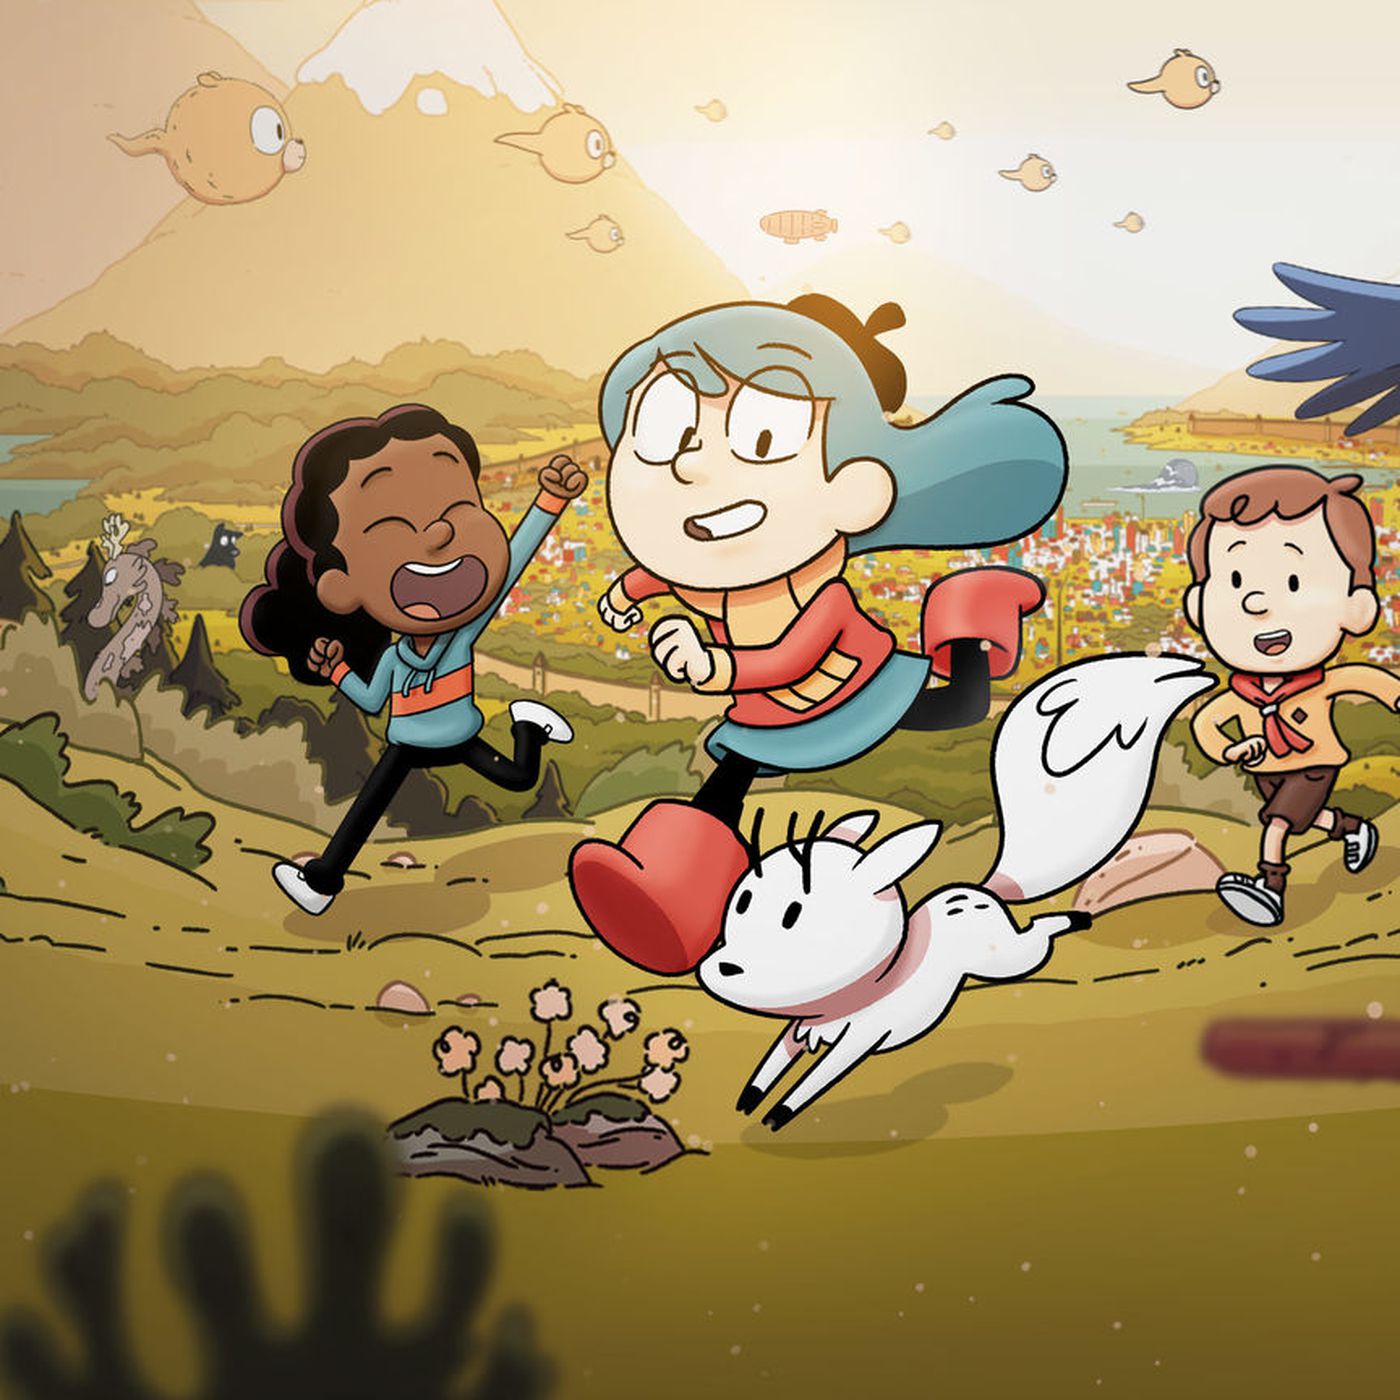 Hilda Season 3 Release Date Here are the details